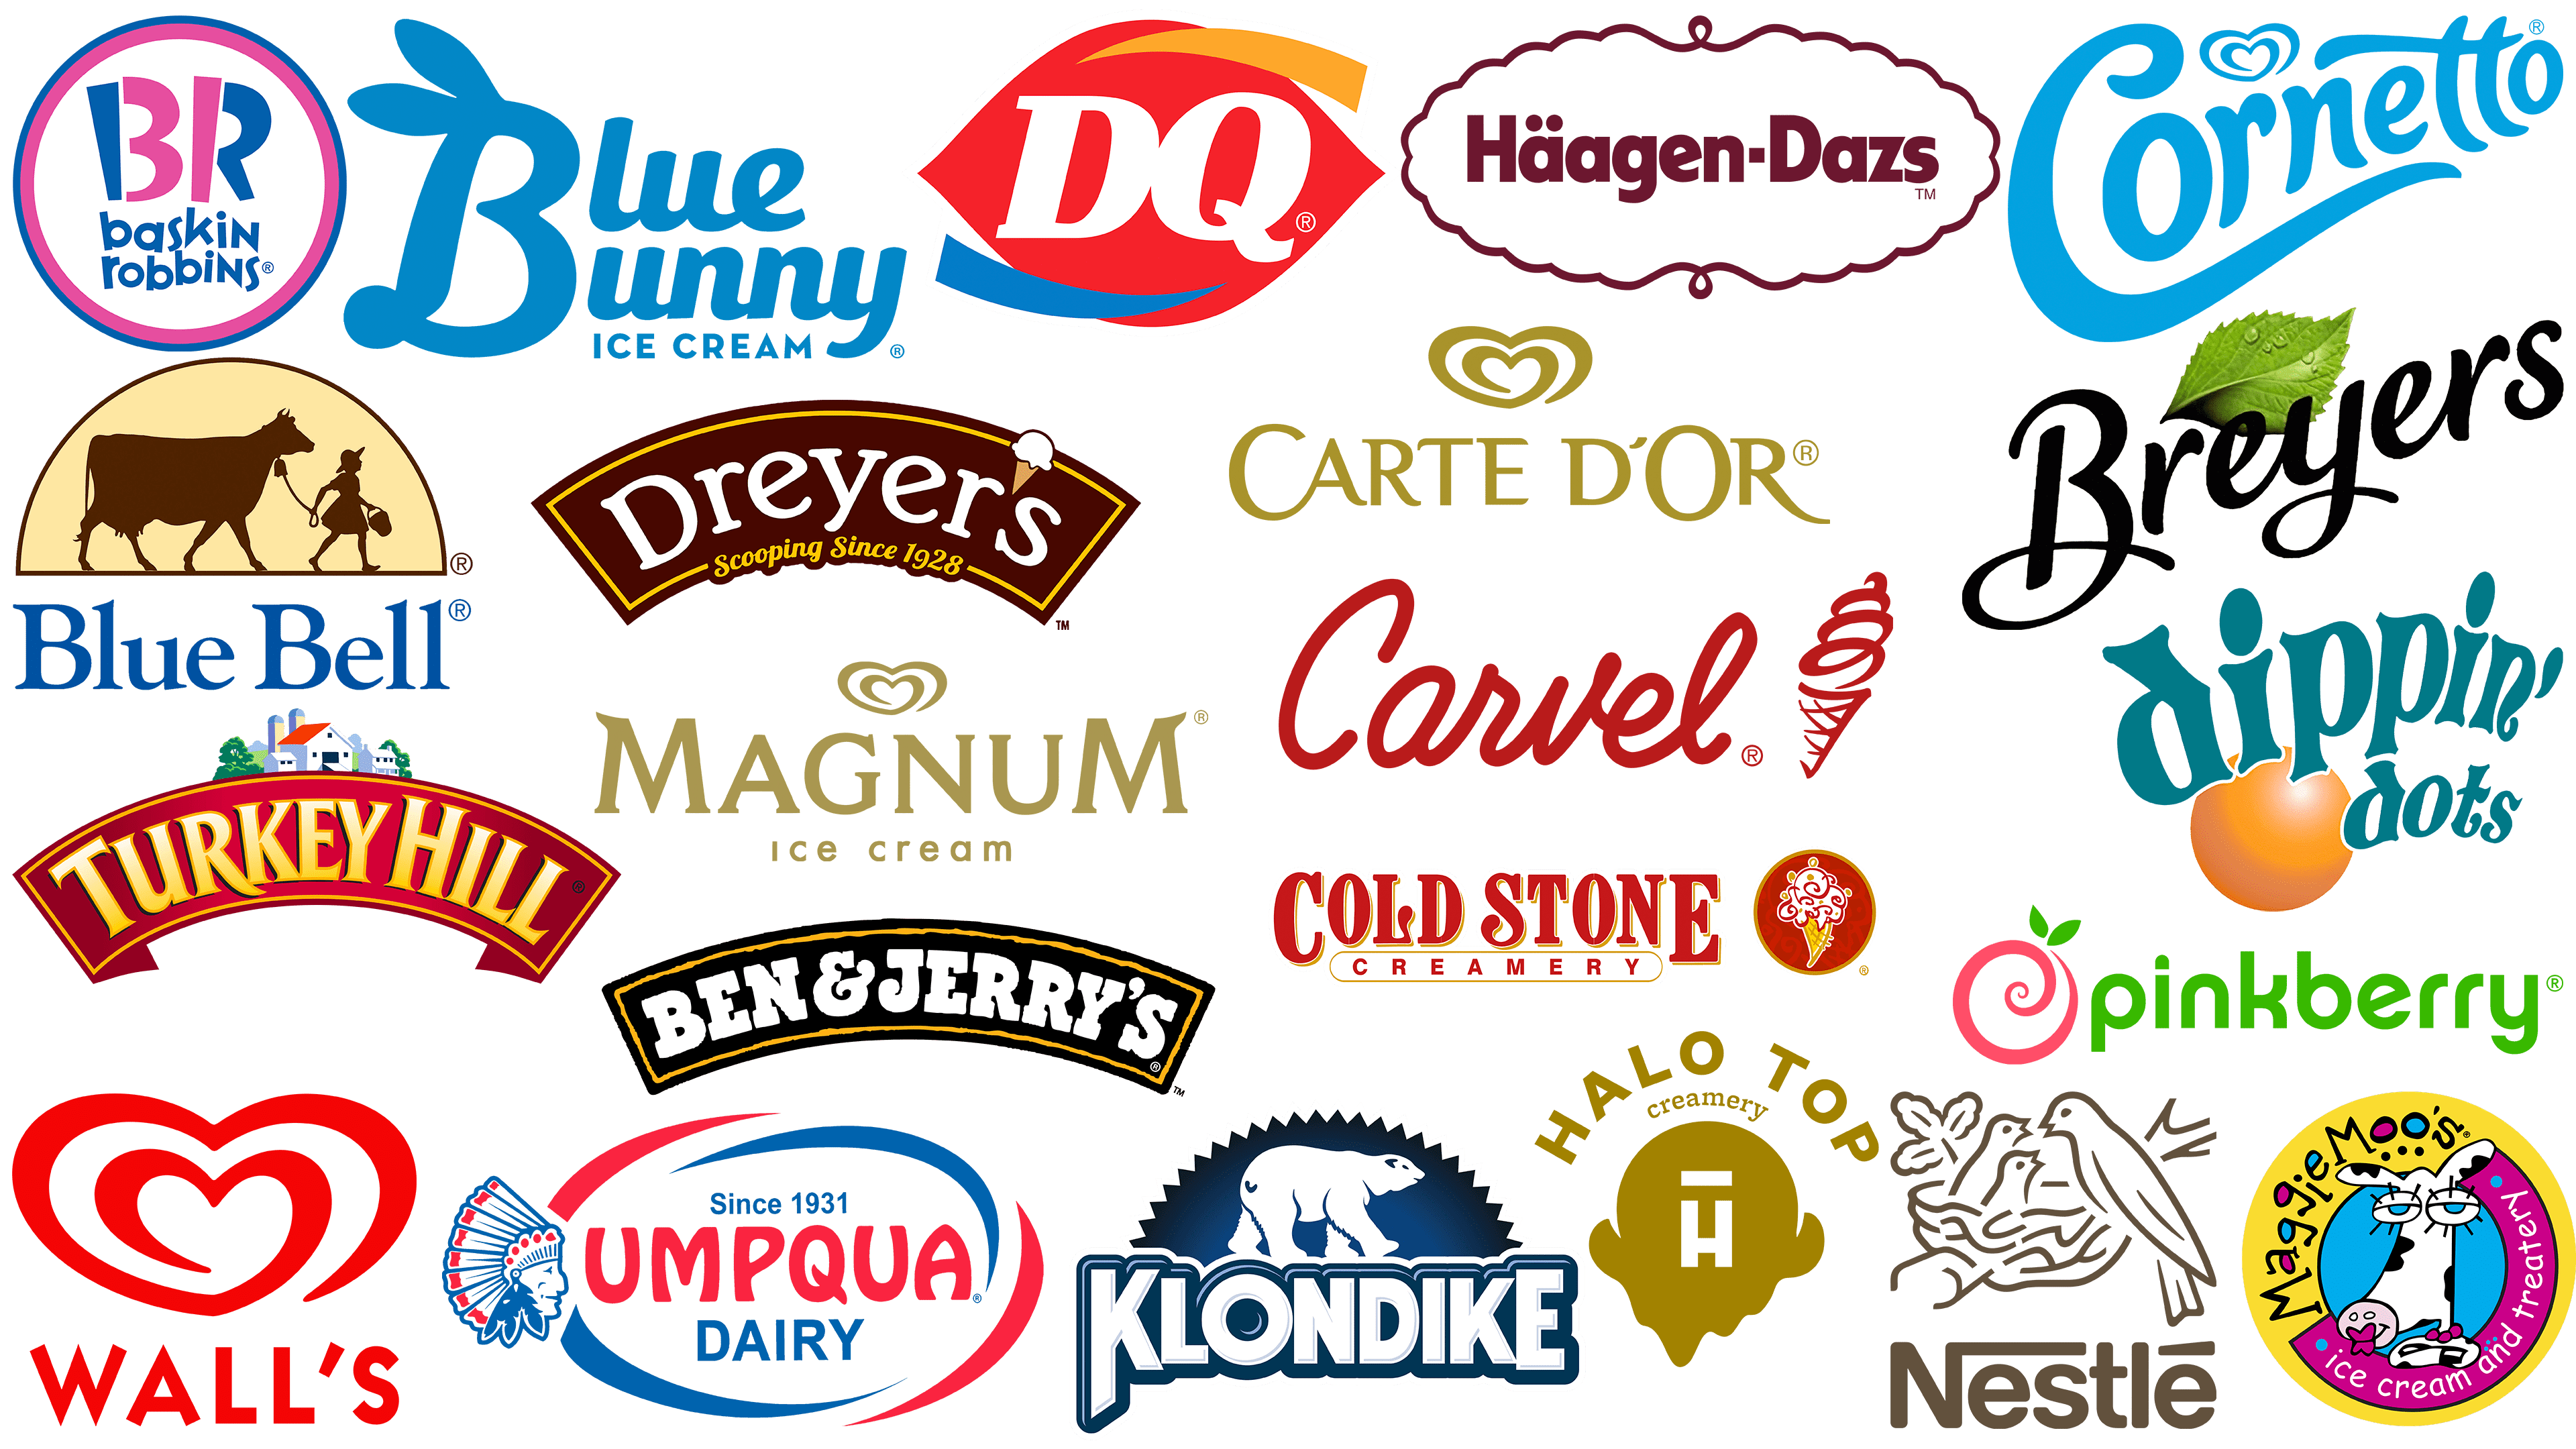 Halo Top Logo and symbol, meaning, history, PNG, brand